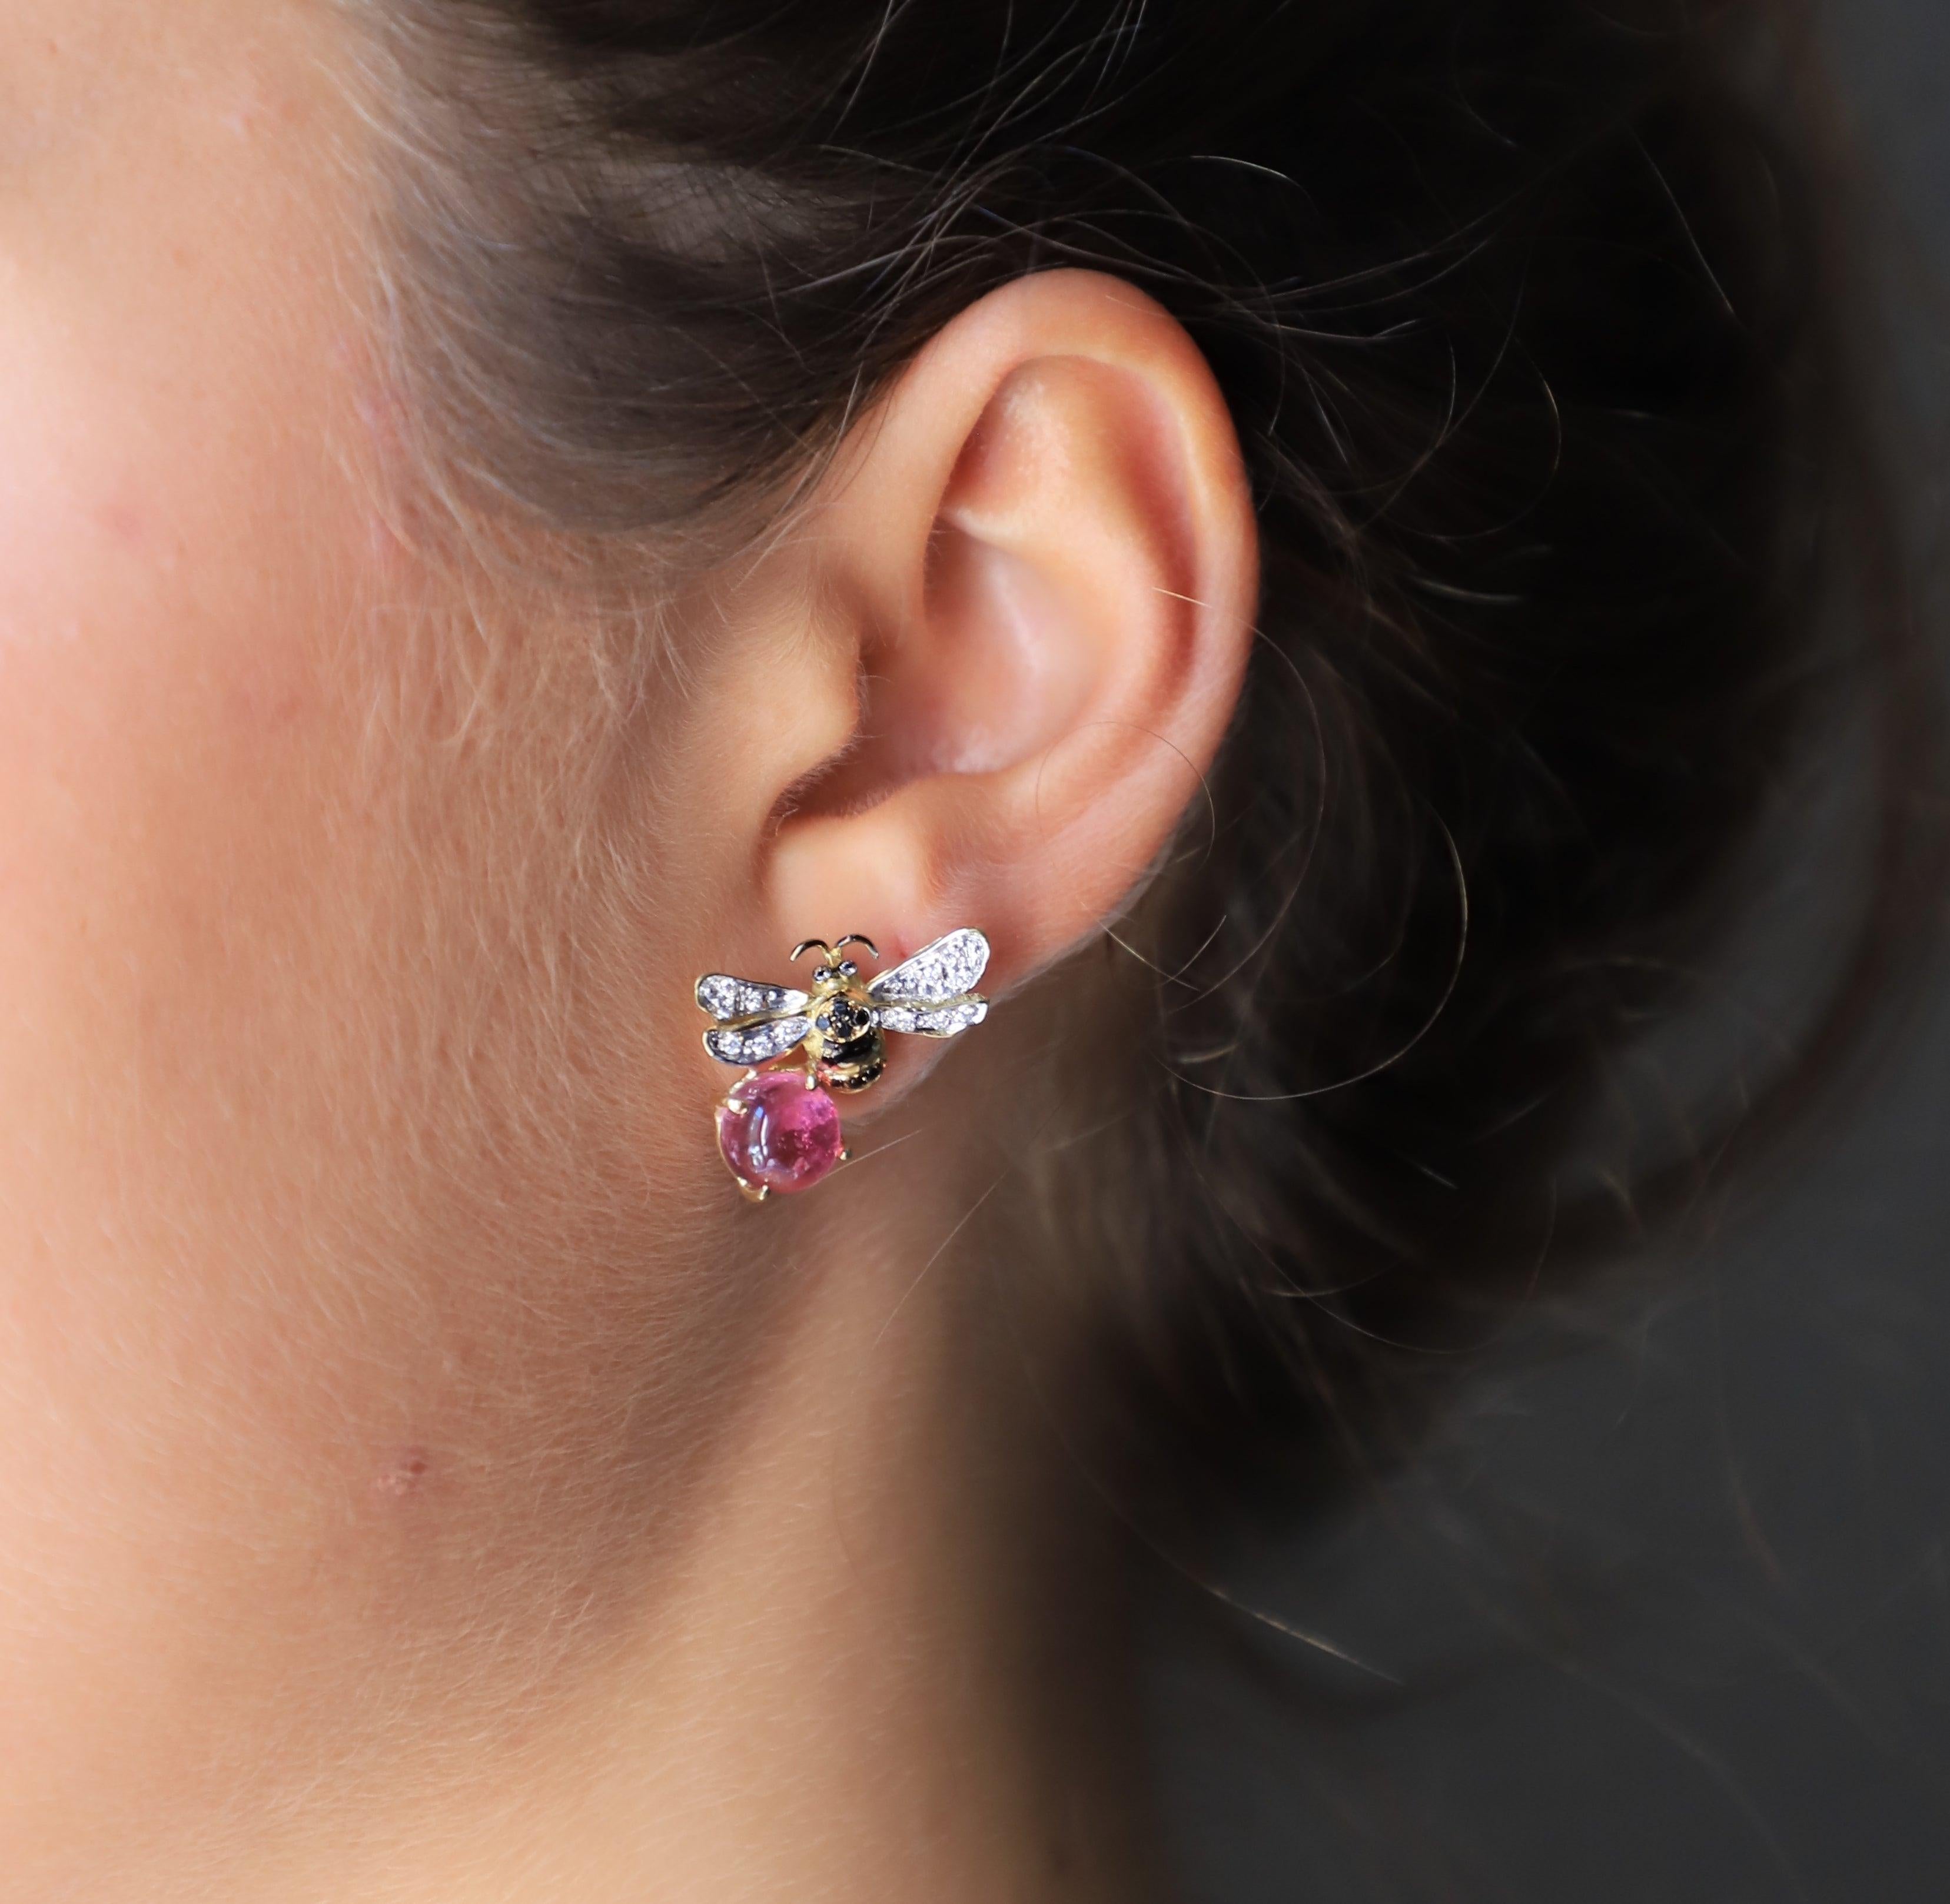 Rossella Ugolini Design Collection, a pair of Big Bees Stud Earrings handcrafted in 18 Karat Yellow Gold 5.5 Karat Pink& Green Tourmaline 0.16 Karat White Diamond 0.18 Karat Black Diamonds 
The two different colors of pink and green tourmalines make